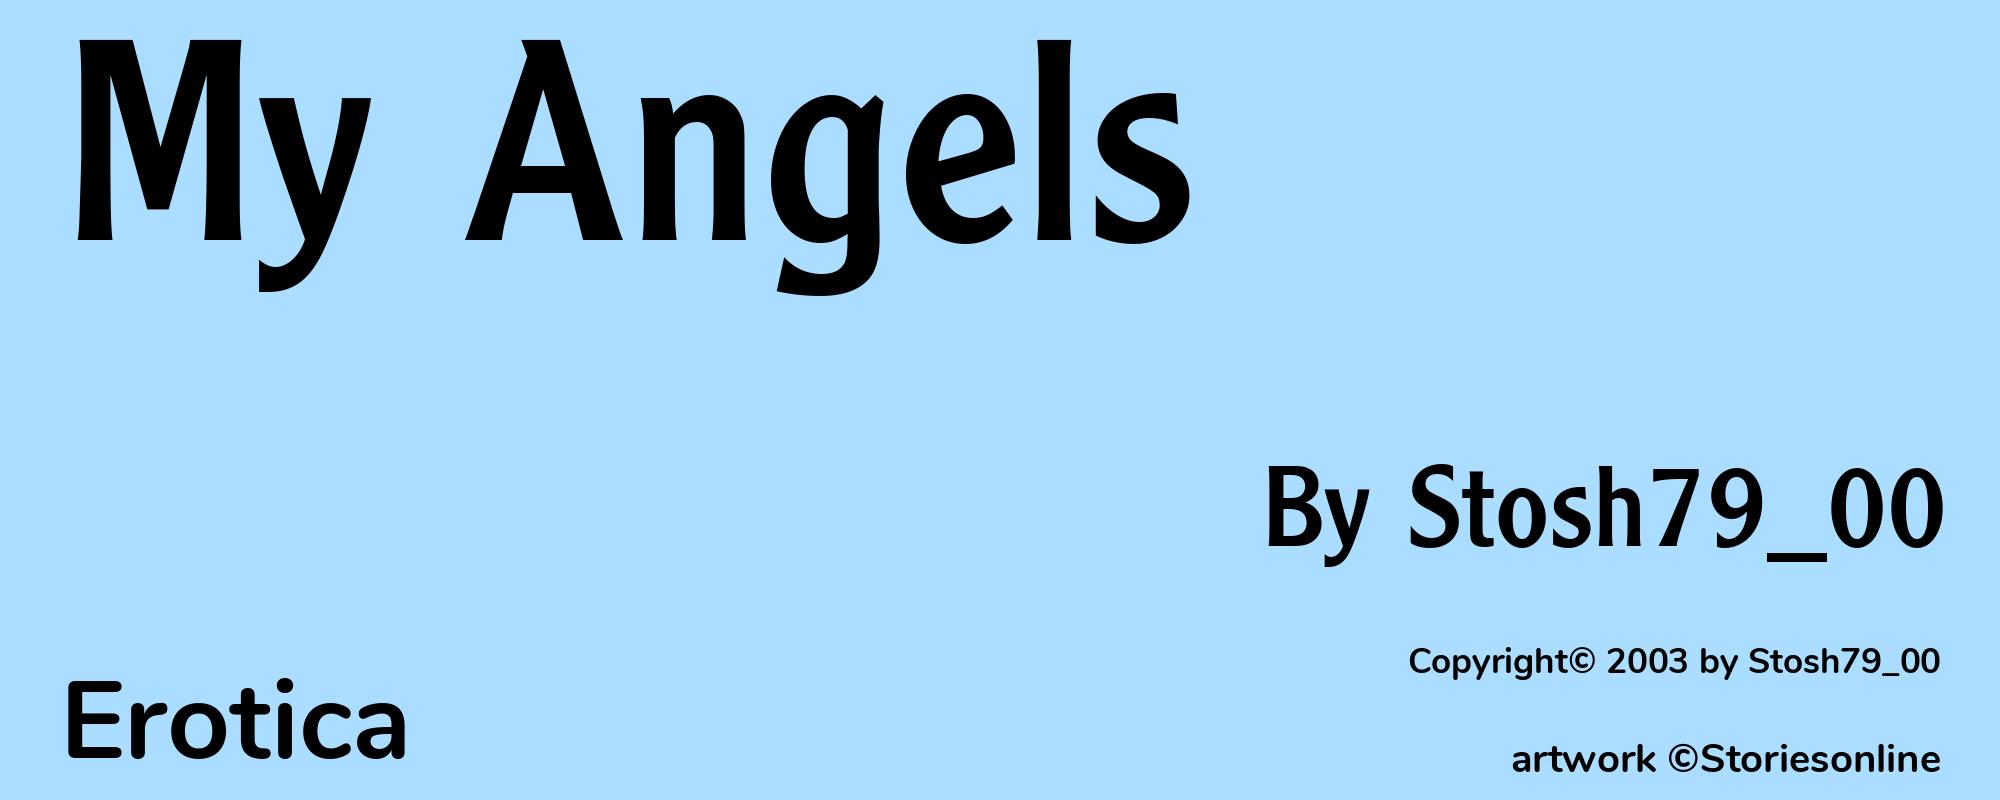 My Angels - Cover